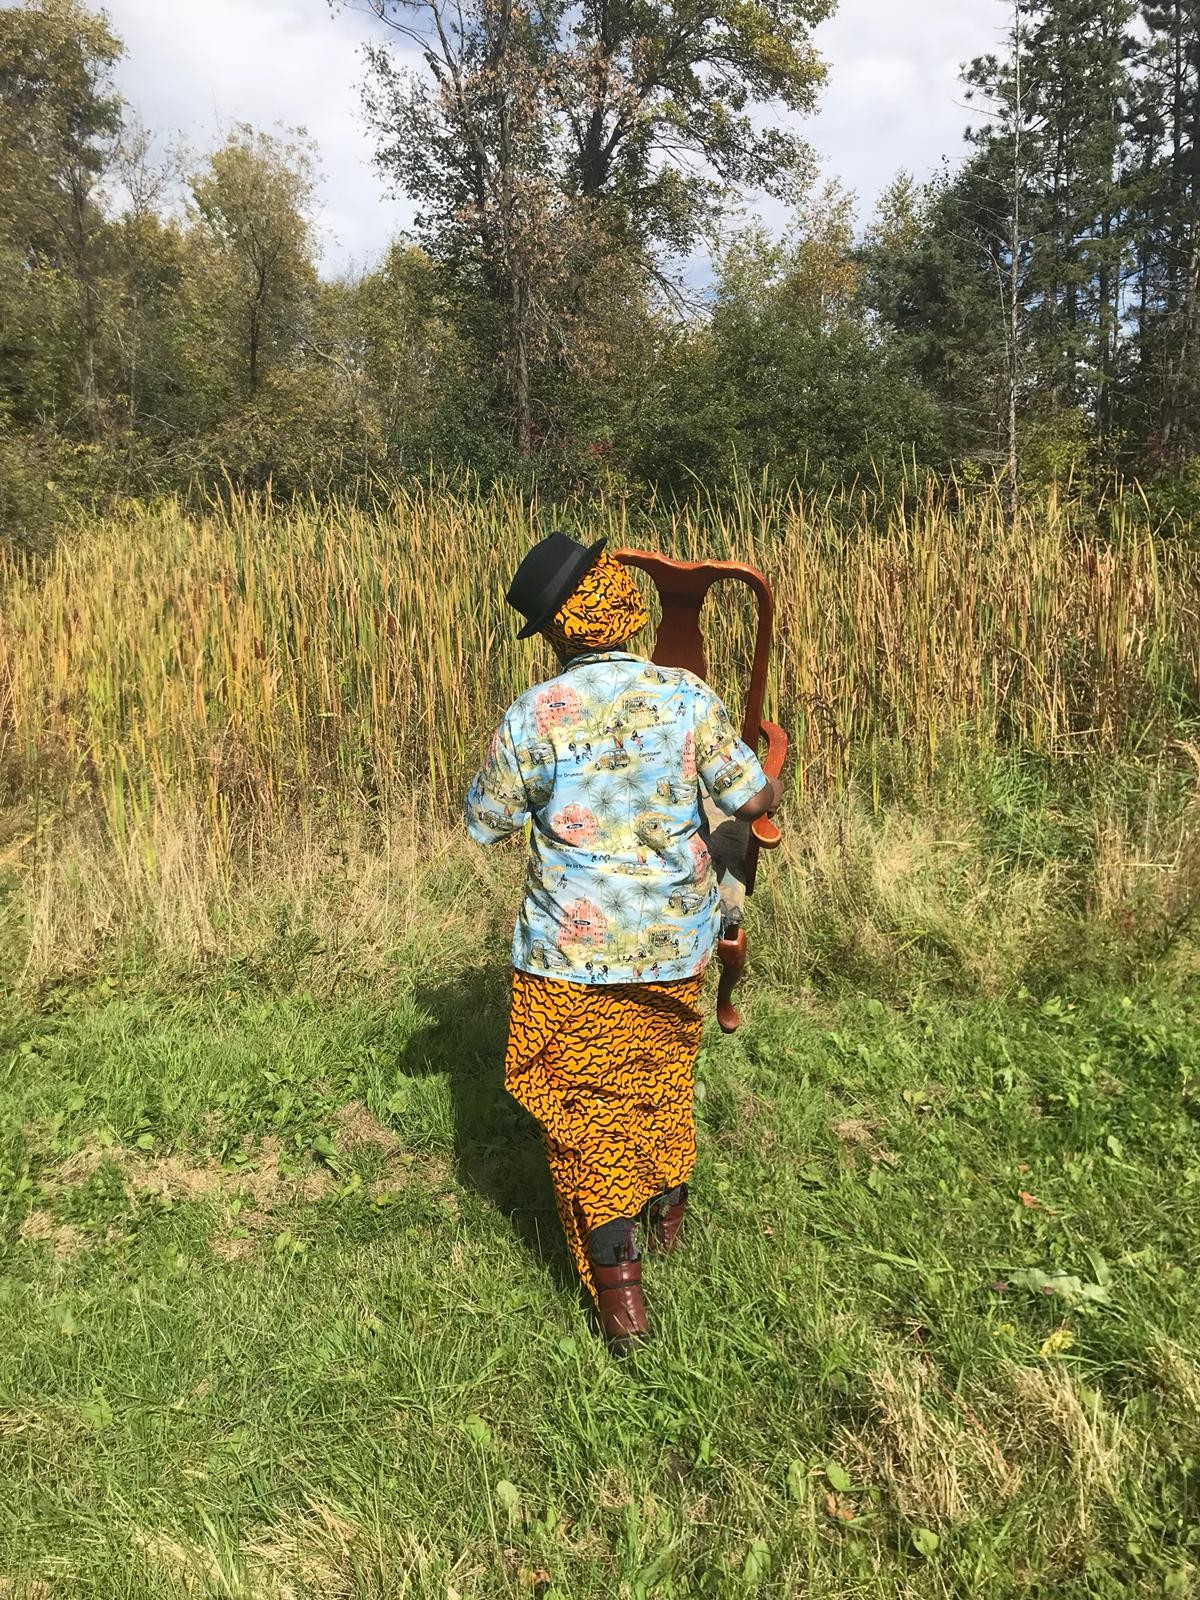 Ego Ahaiwe Sowinski is facing away from the camera, towards tall grass and trees, carrying a wooden chair. She is dressed in brightly patterned fabrics, and wearing a fedora on top of a headscarf, tilted at an angle.